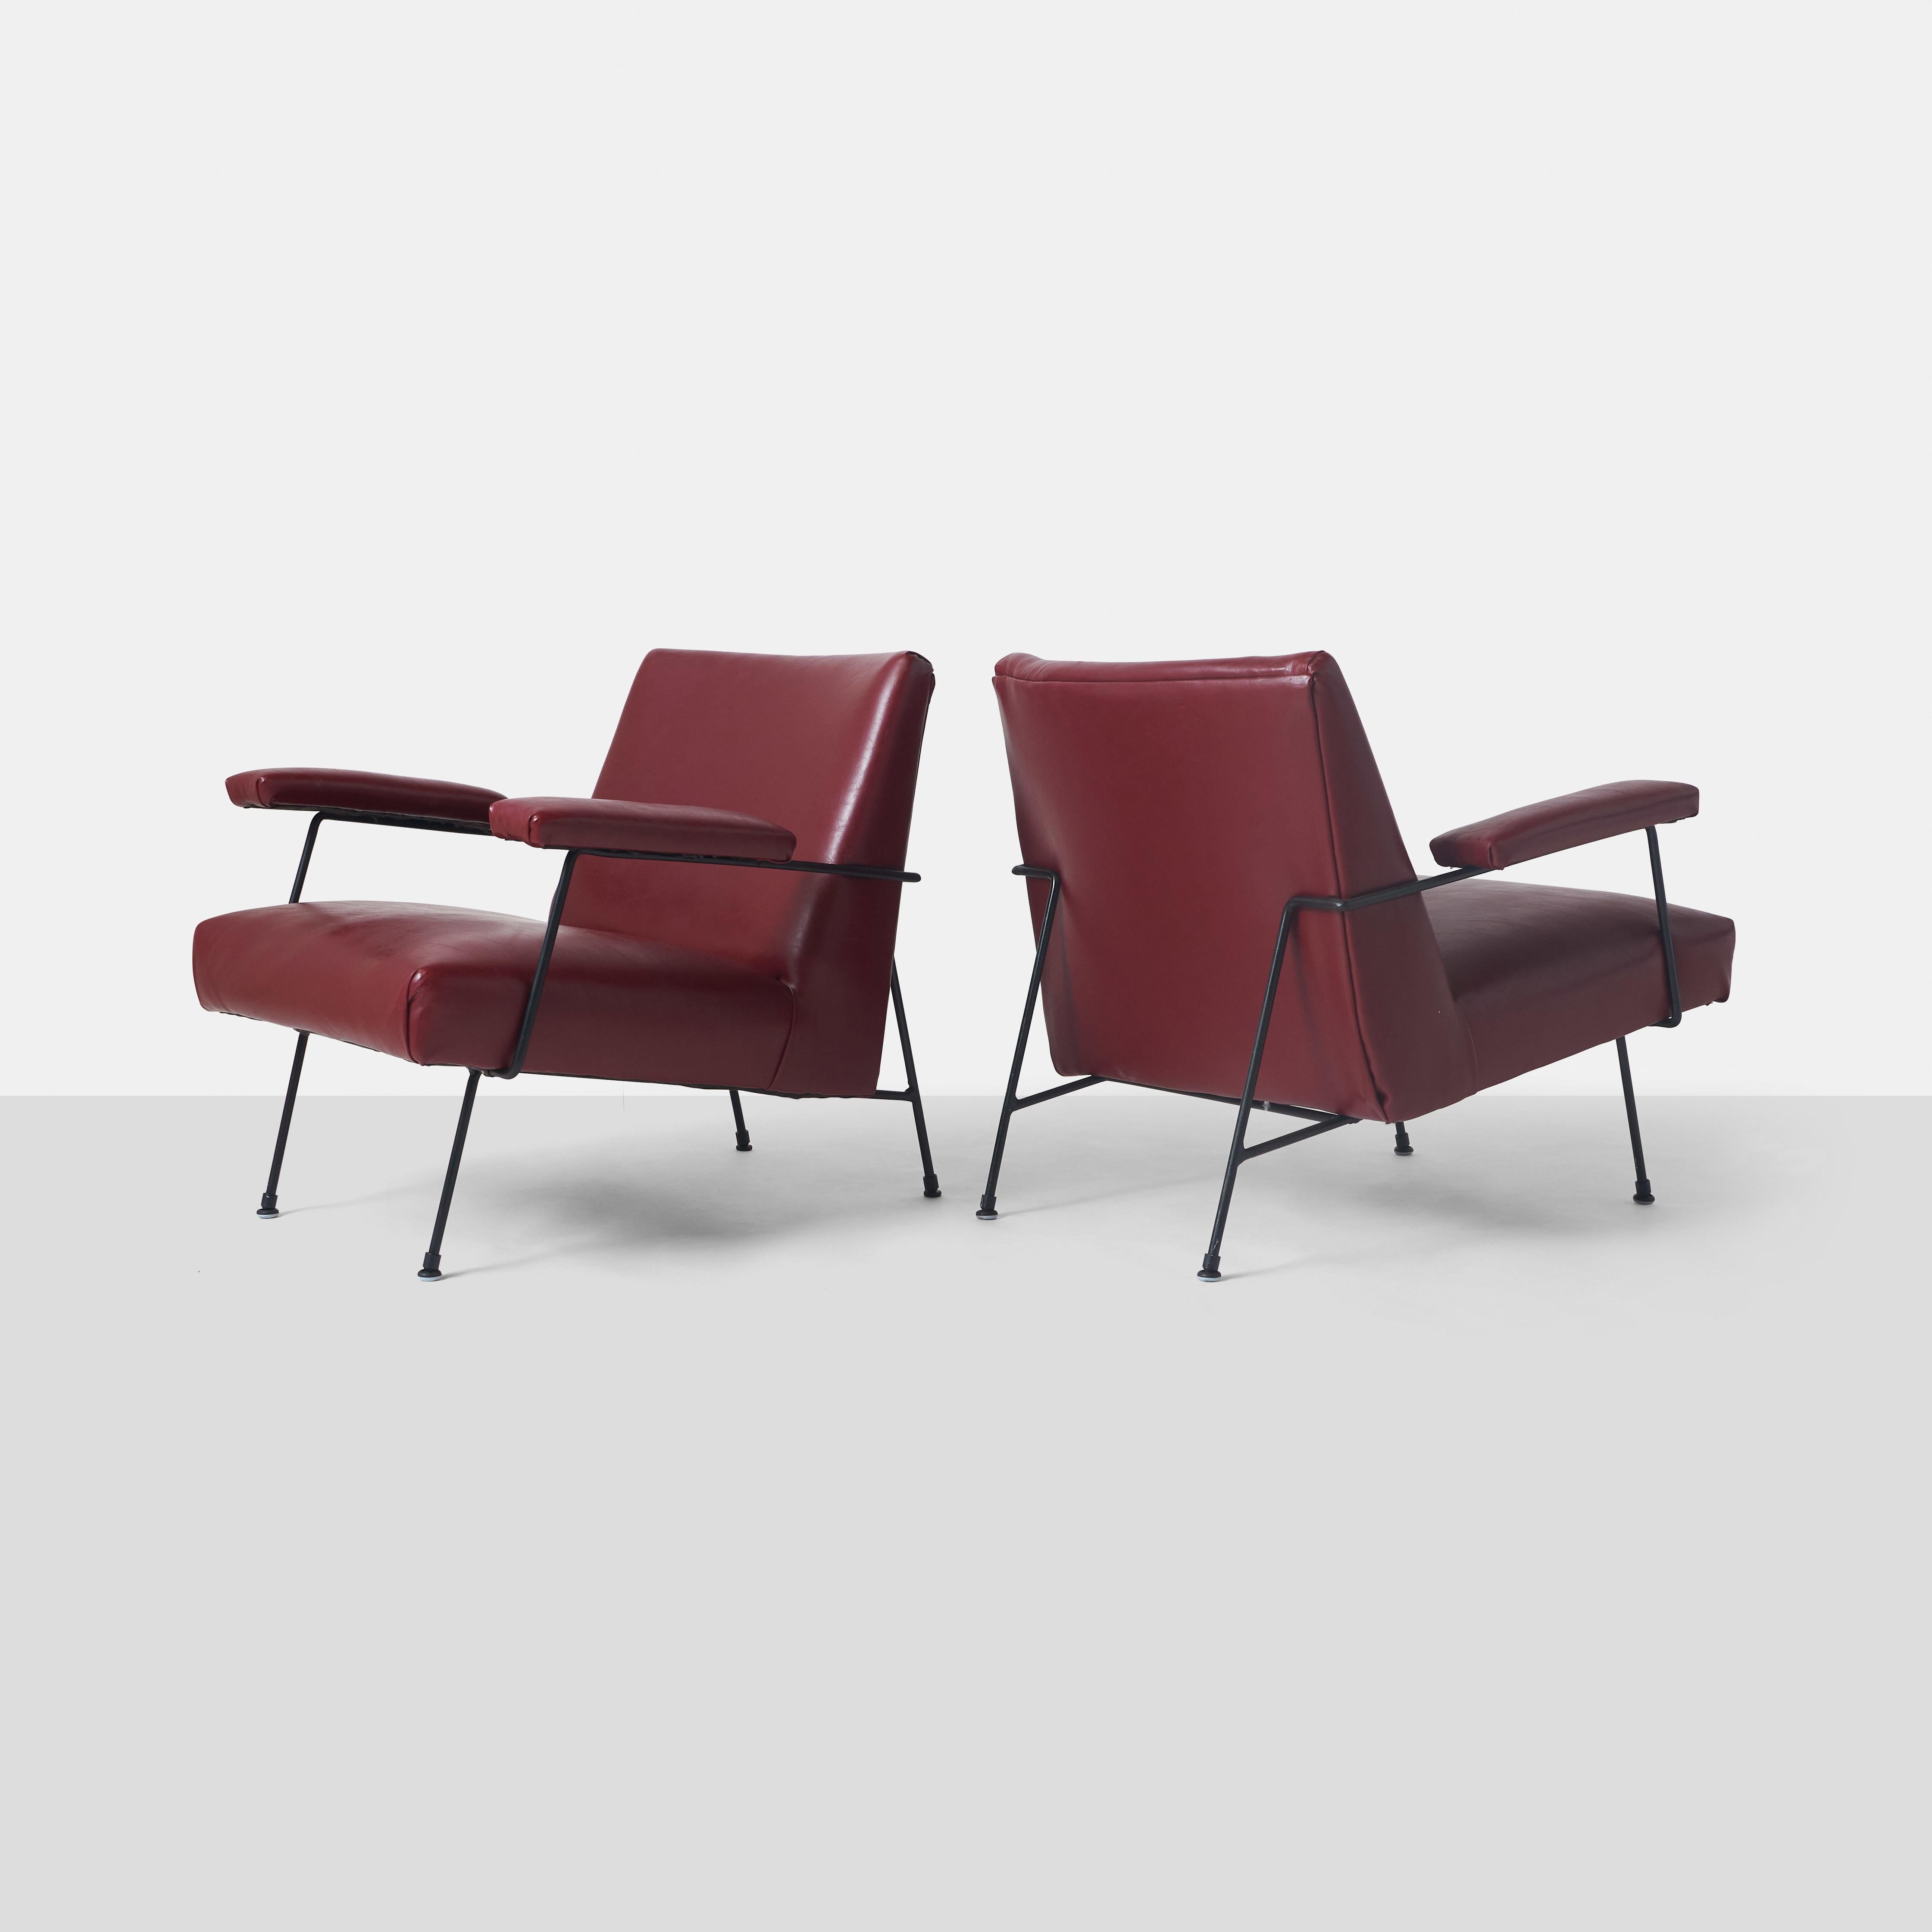 A pair of rare lounge chairs by Milo Baughman. Features a black iron frame. Manufactured by Pacific Iron Products 1950.

The frames have been repainted at some point. While the red faux leather upholstery is in fair condition, the chairs would